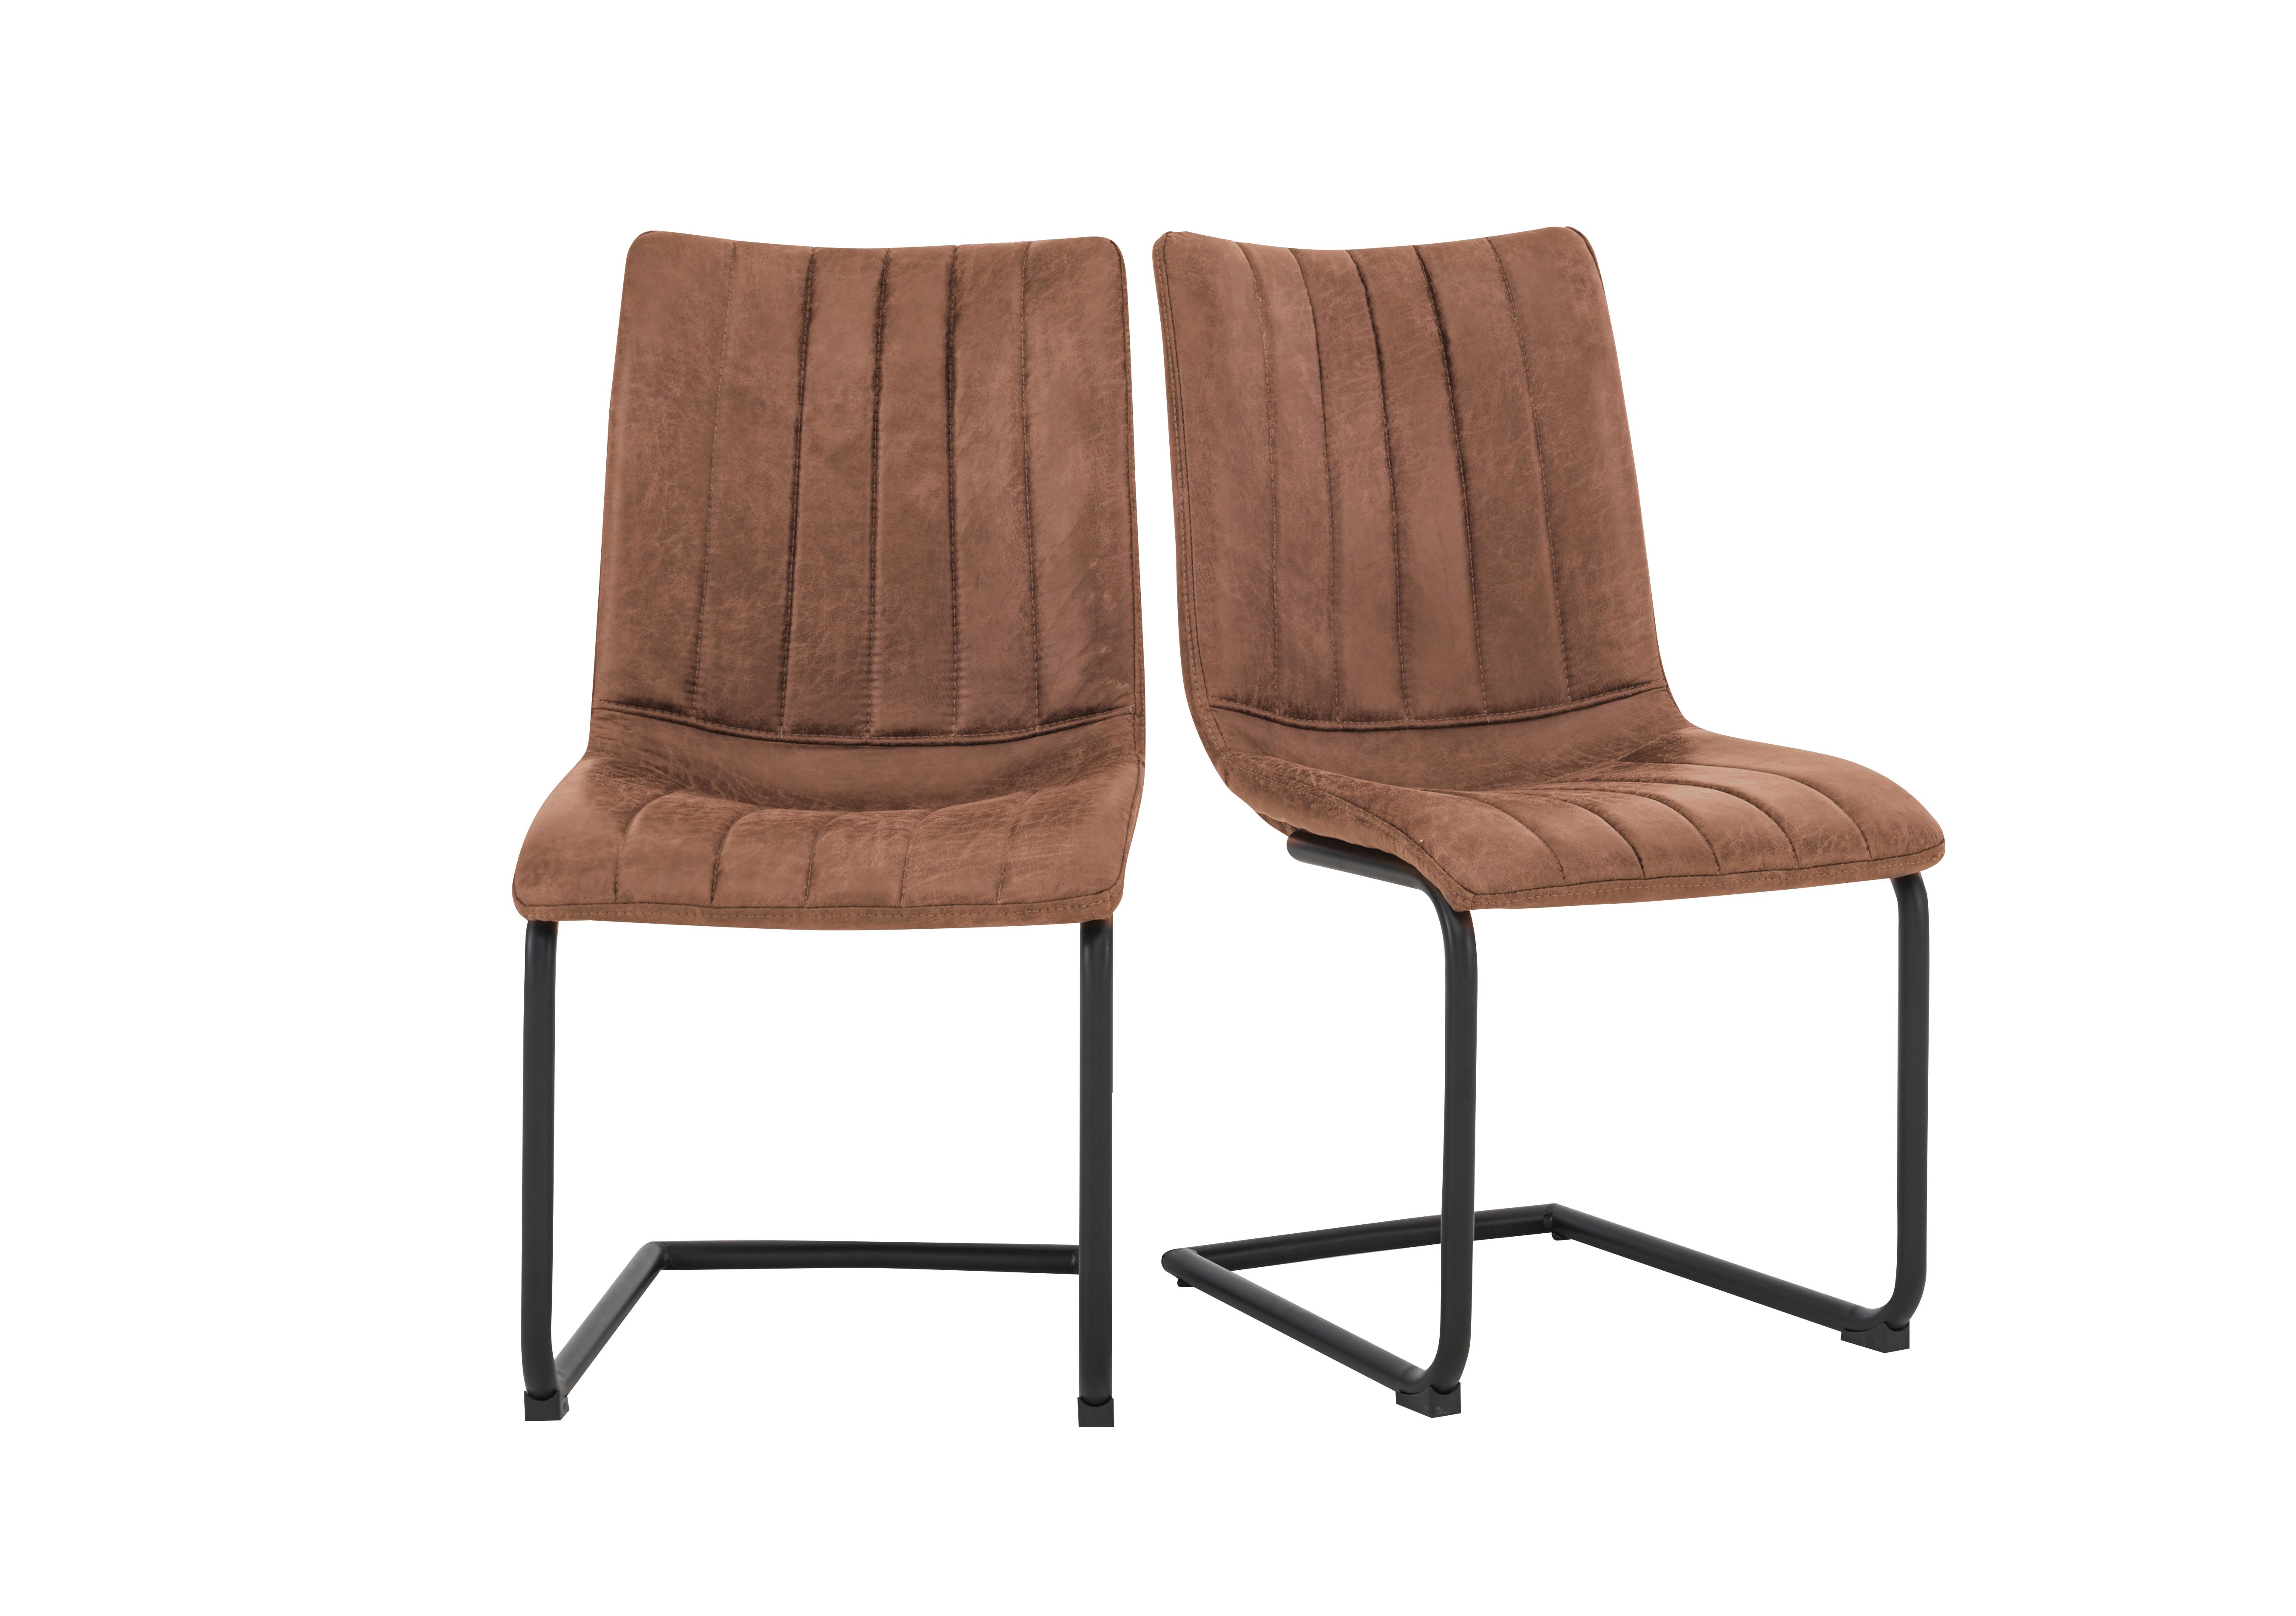 Ranger Pair of Cantilever Dining Chairs - Furniture Village